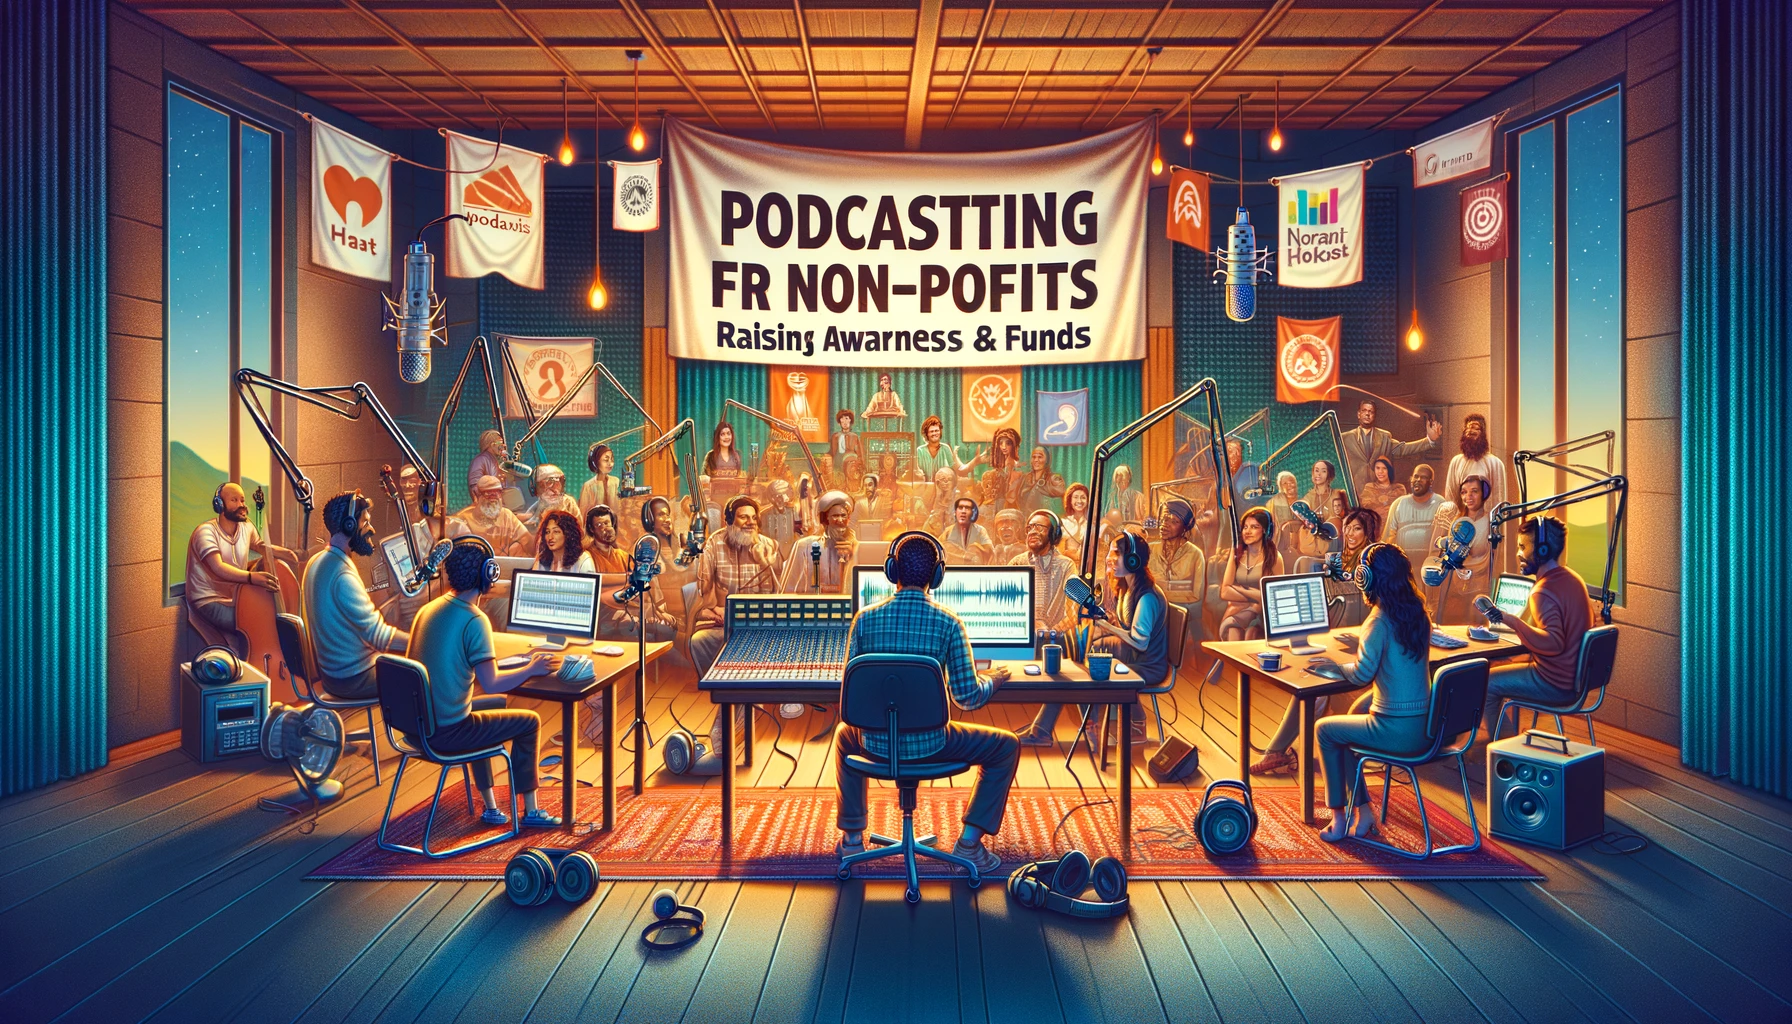 Podcasting for Non-Profits: Raising Awareness and Funds